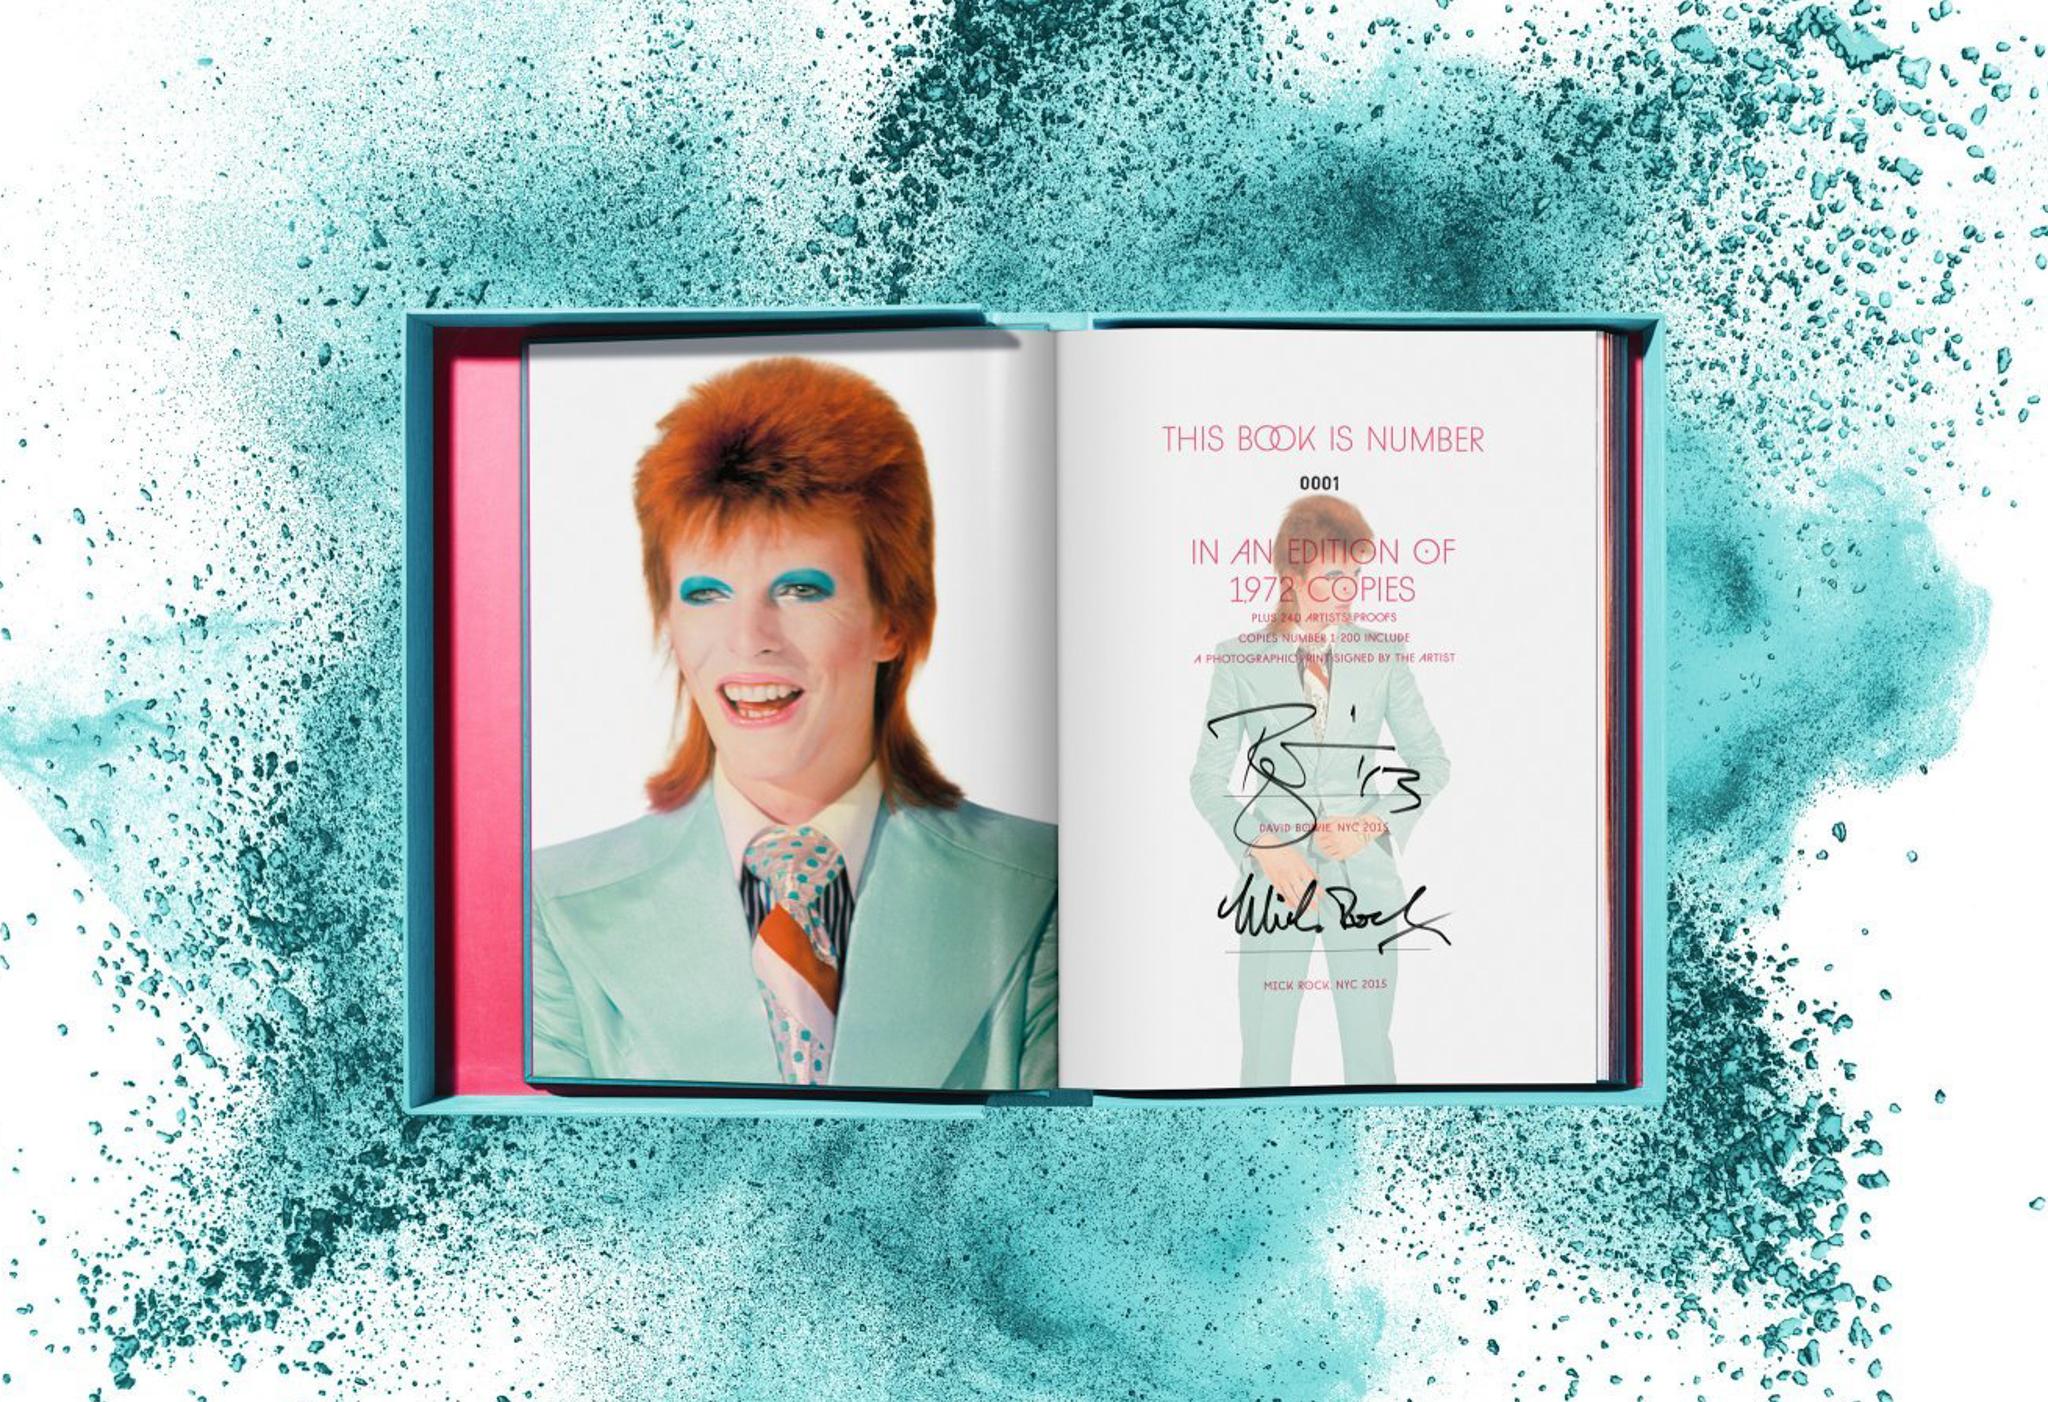 Mick Rock
David Bowie, Art Edition ‘Scotland, May 1973’

Super Rare Artist's Proof (AP 040)
Incl. Signed Print Scotland, May 1973
Completely New & Factory-Sealed

TASCHEN  2015

Art Edition of 100 copies + 20 artist's proofs (APs), signed by David